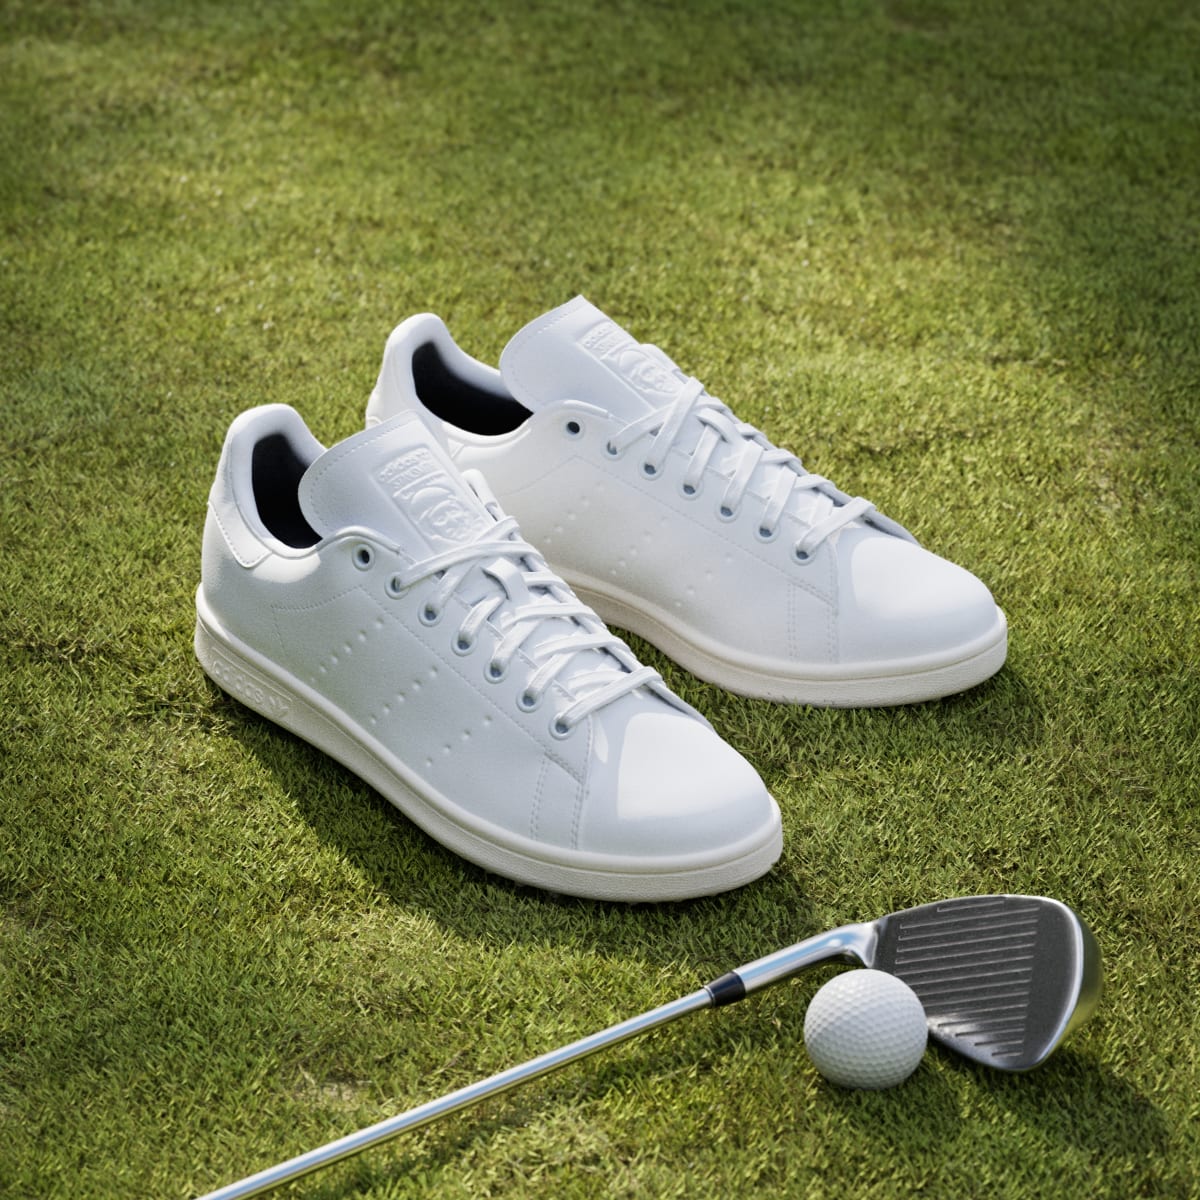 Adidas Stan Smith Golf Shoes. 4